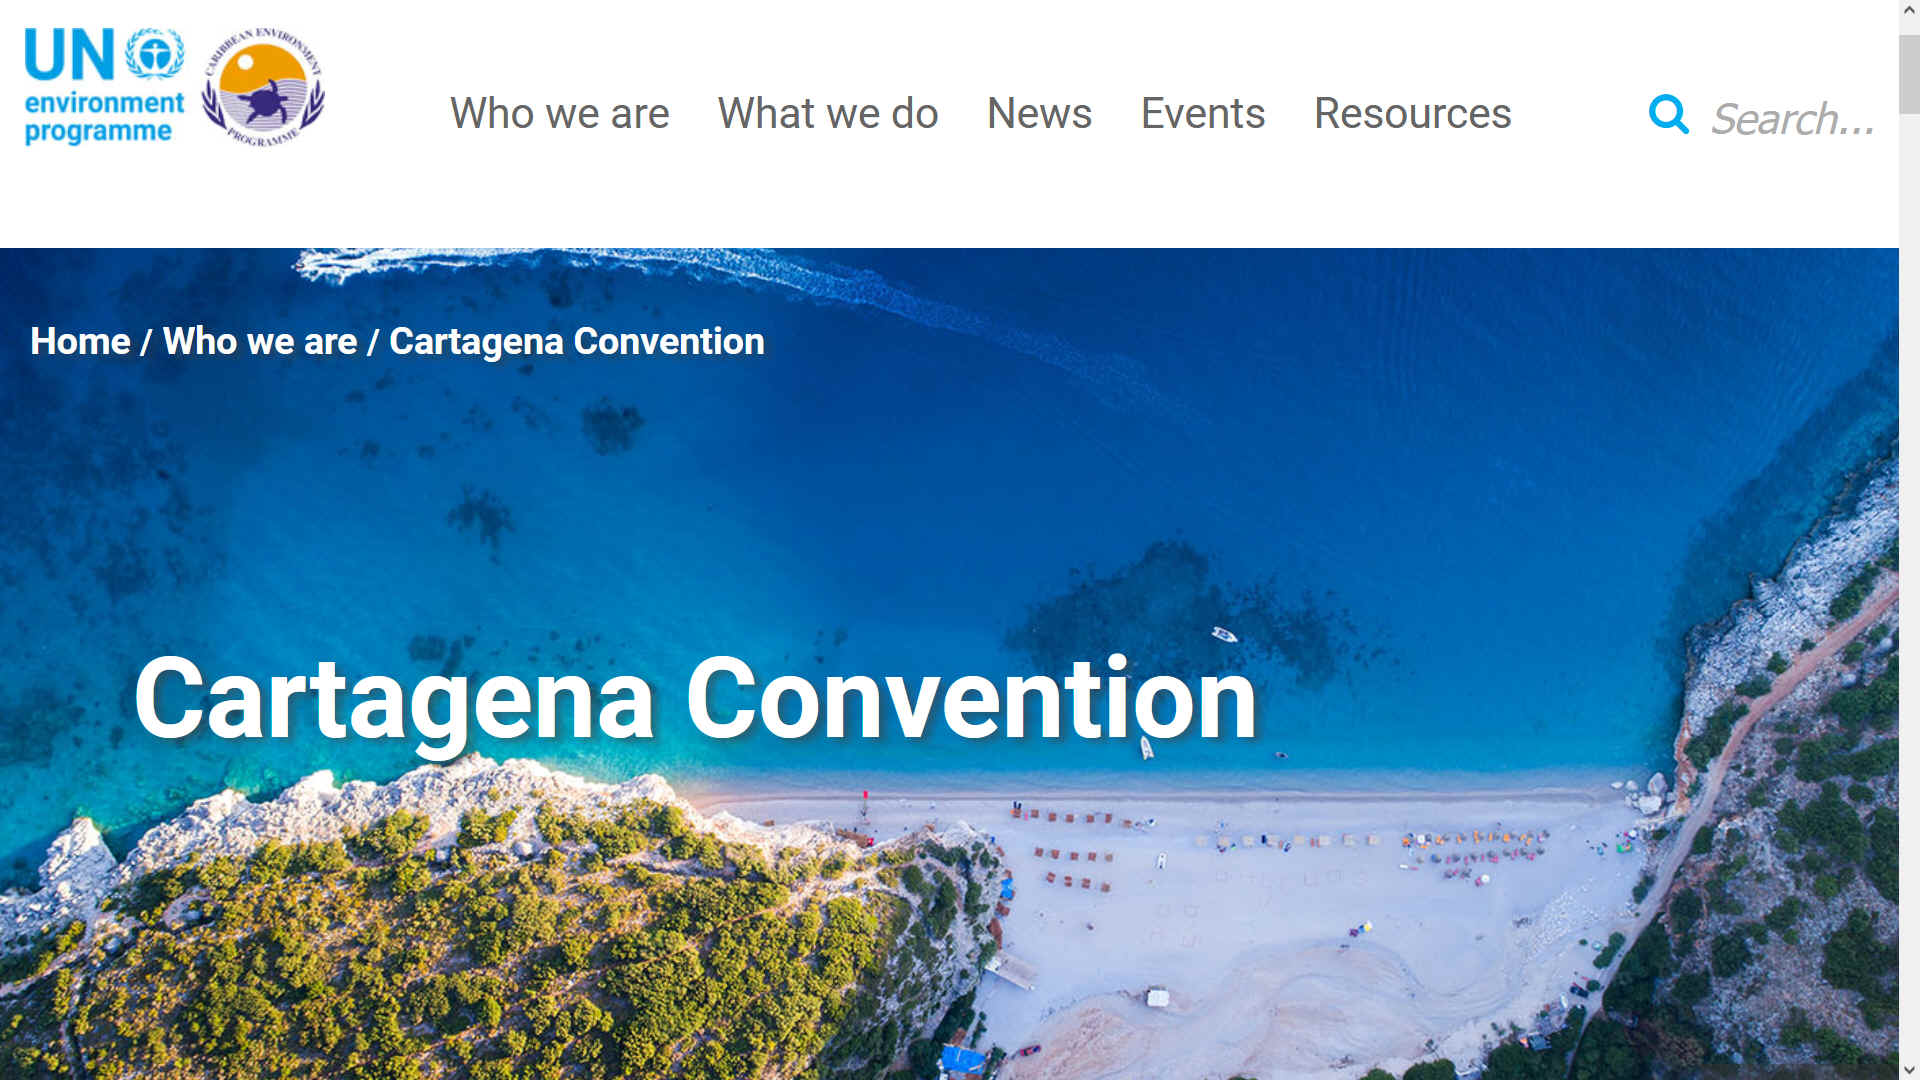 The Cartegena Convention protects and develops the Caribbean, Gulf of Mexico and Atlantic regions